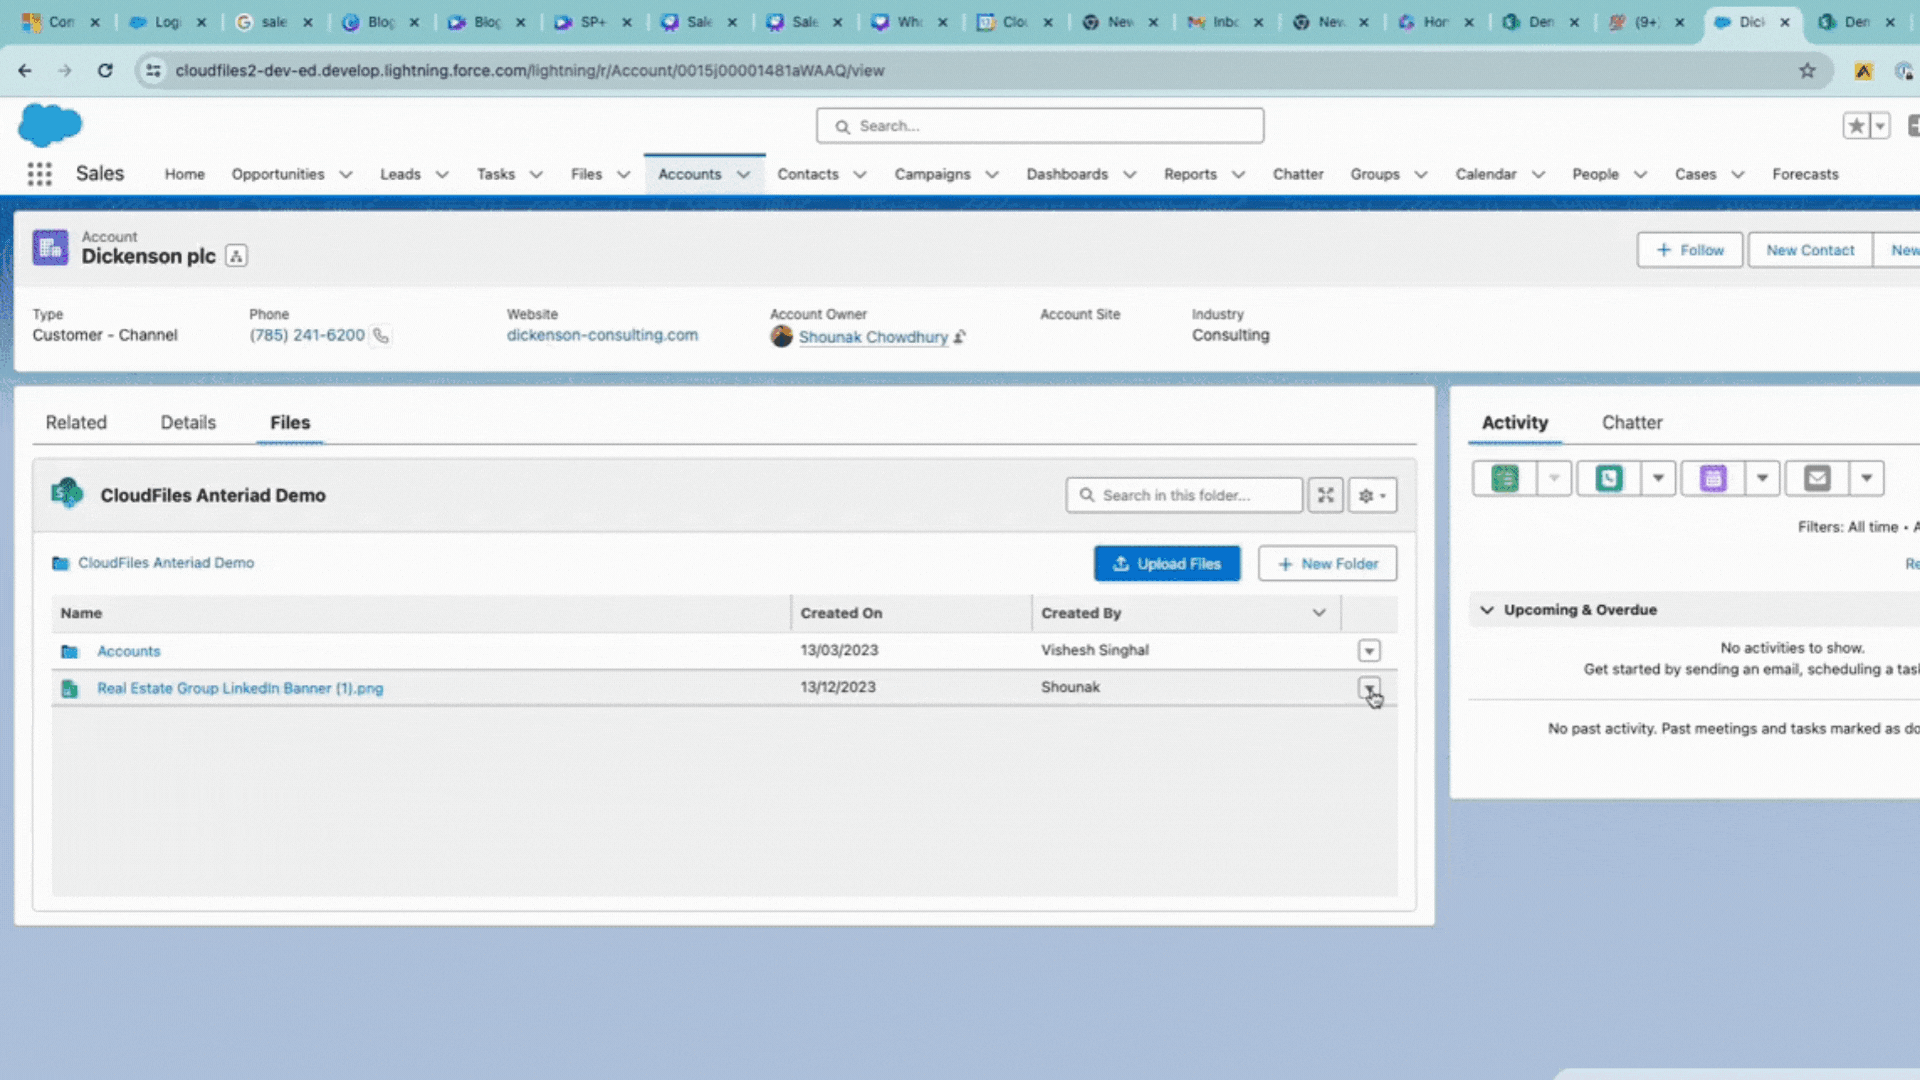 Salesforce SharePoint Integration with CloudFiles